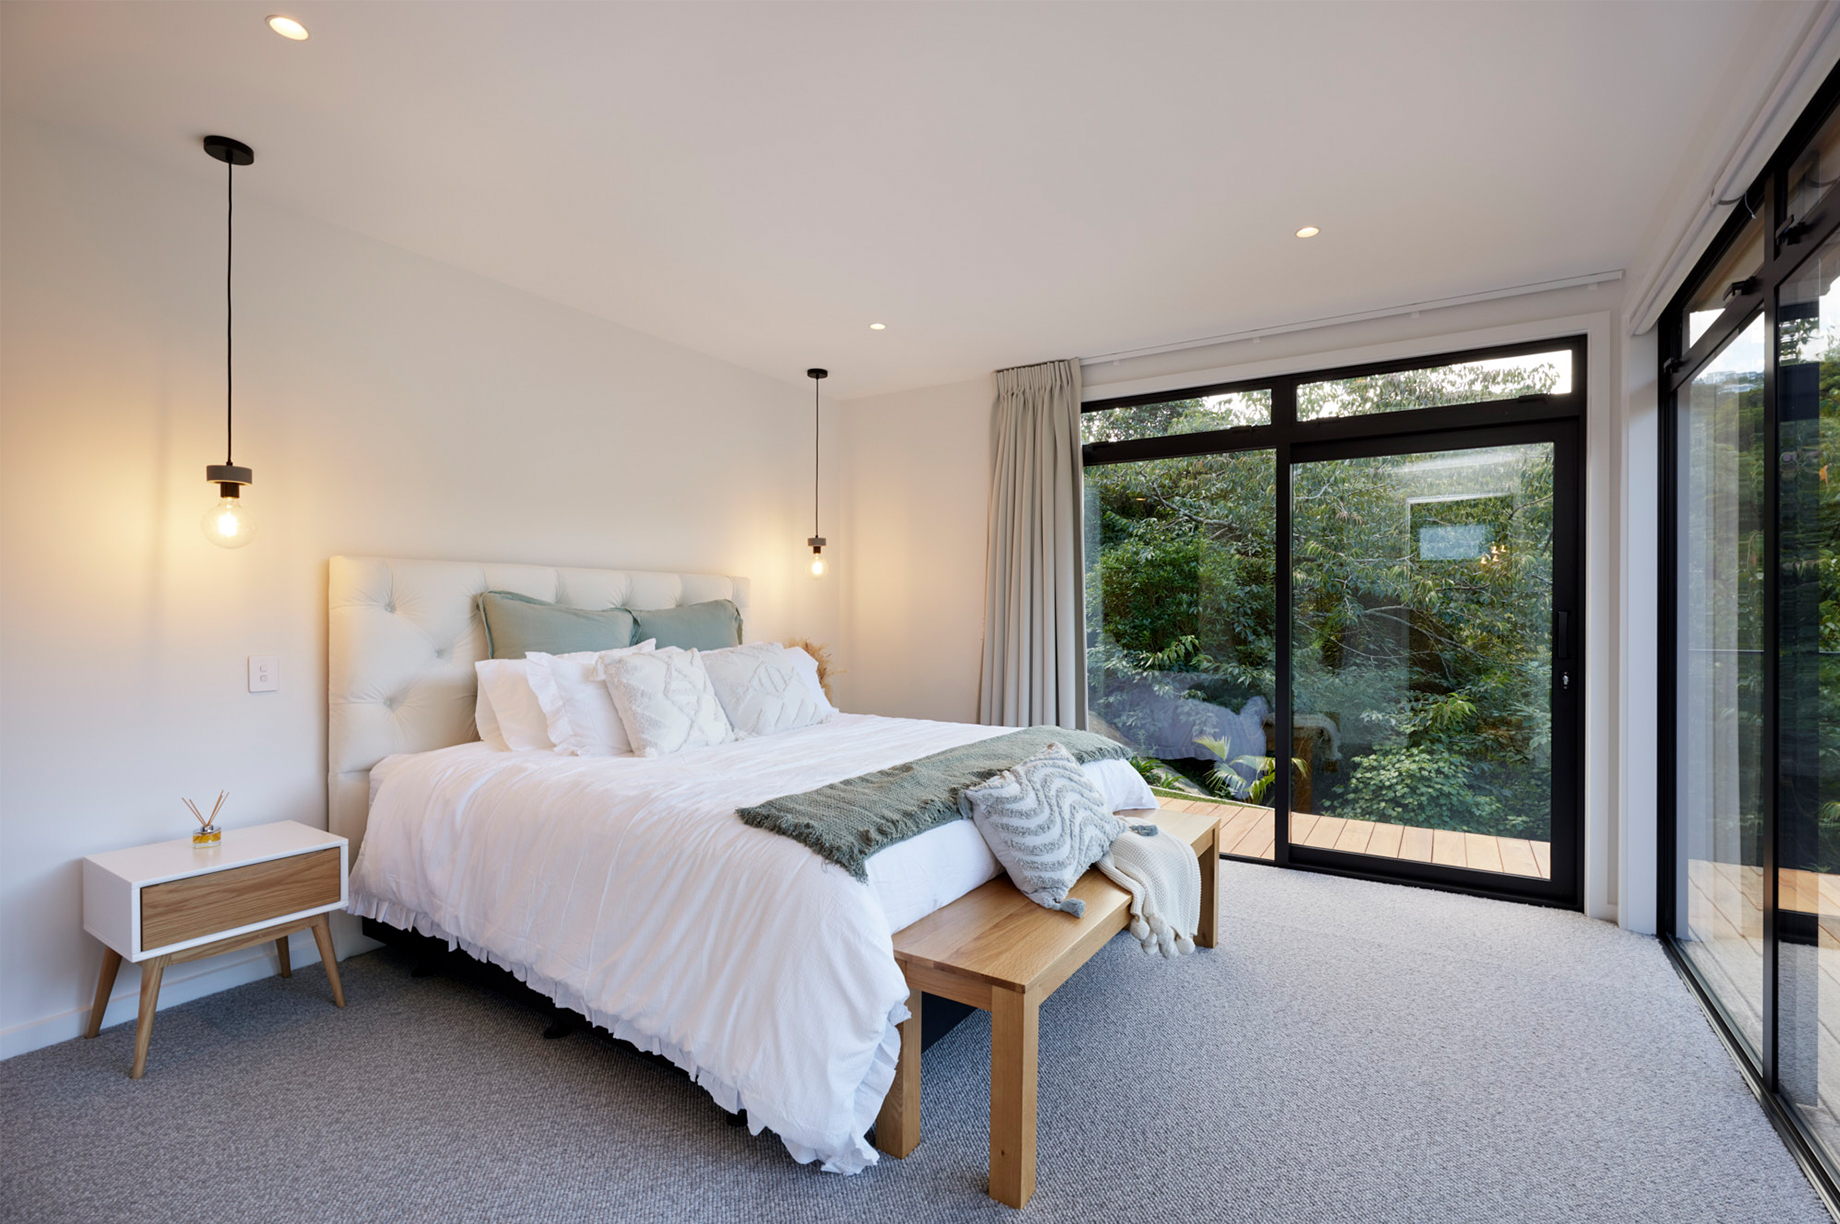 Wellington showhome bedroom interior with outdoor entrance